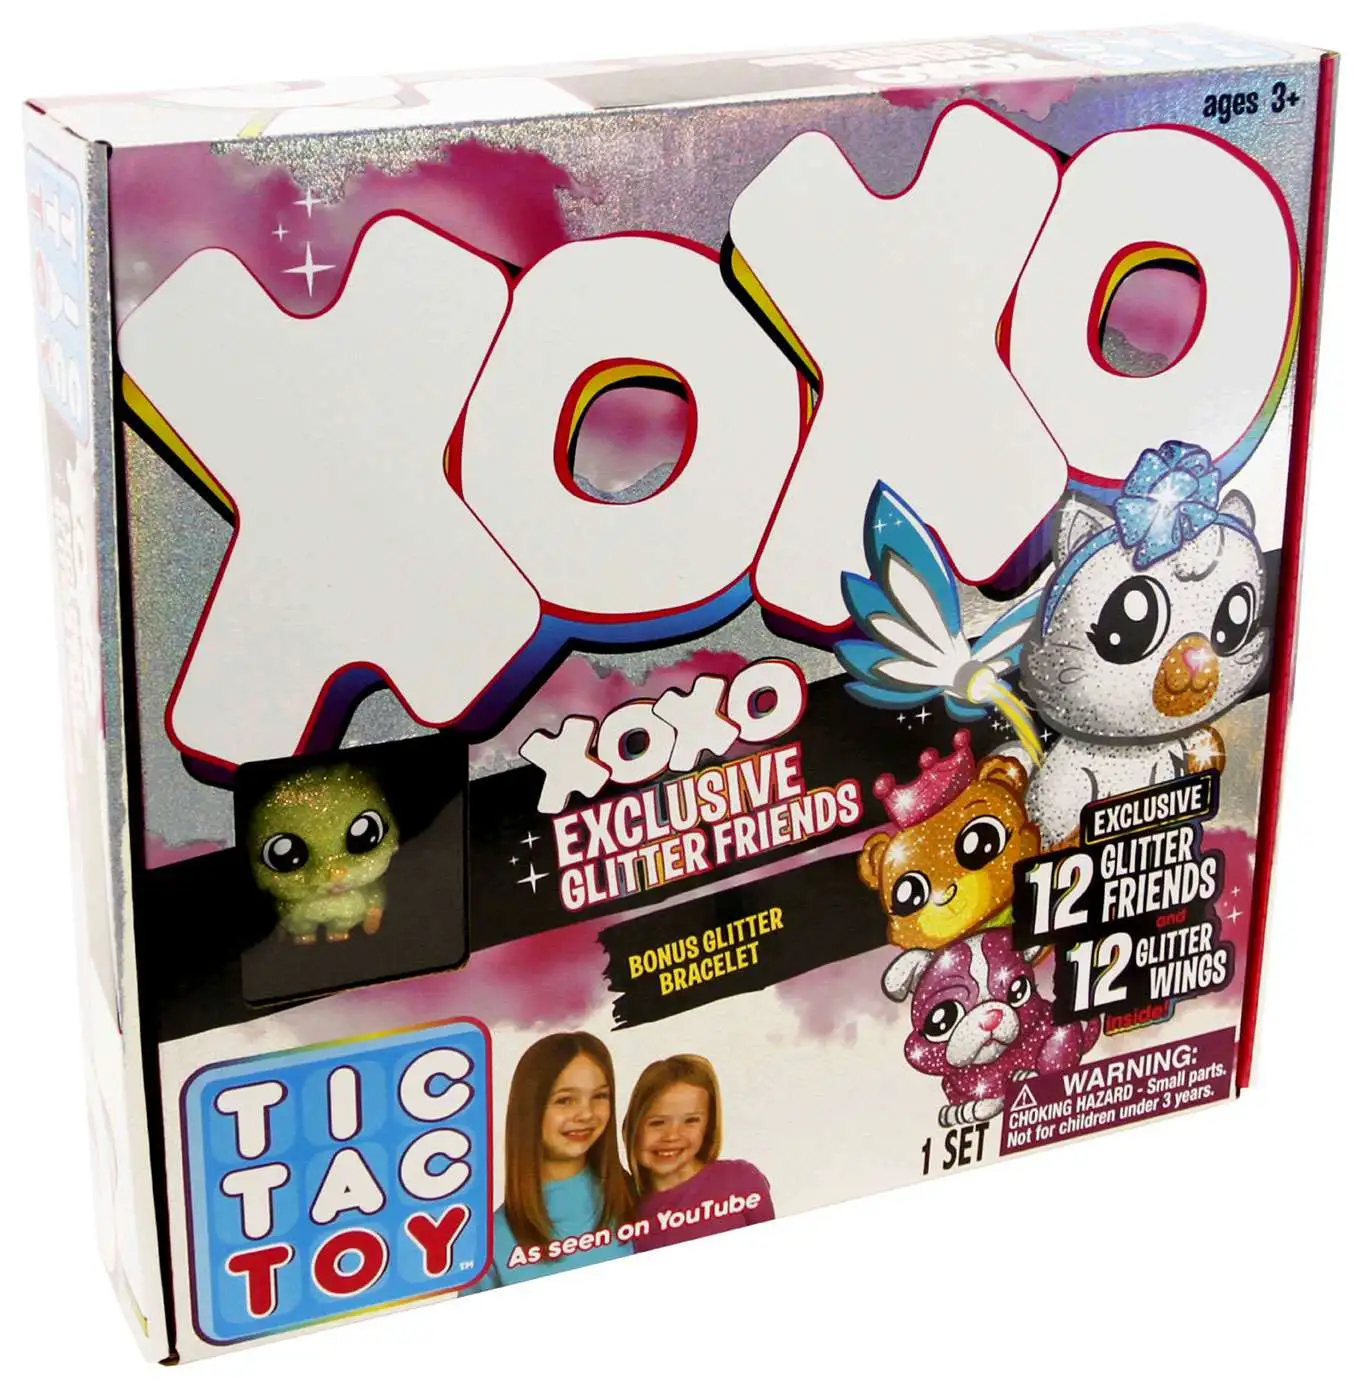 2 Tic Tac Toy XOXO Light up White Unicorn Hugs 6 Glitter Friends 6 Wings for sale online 